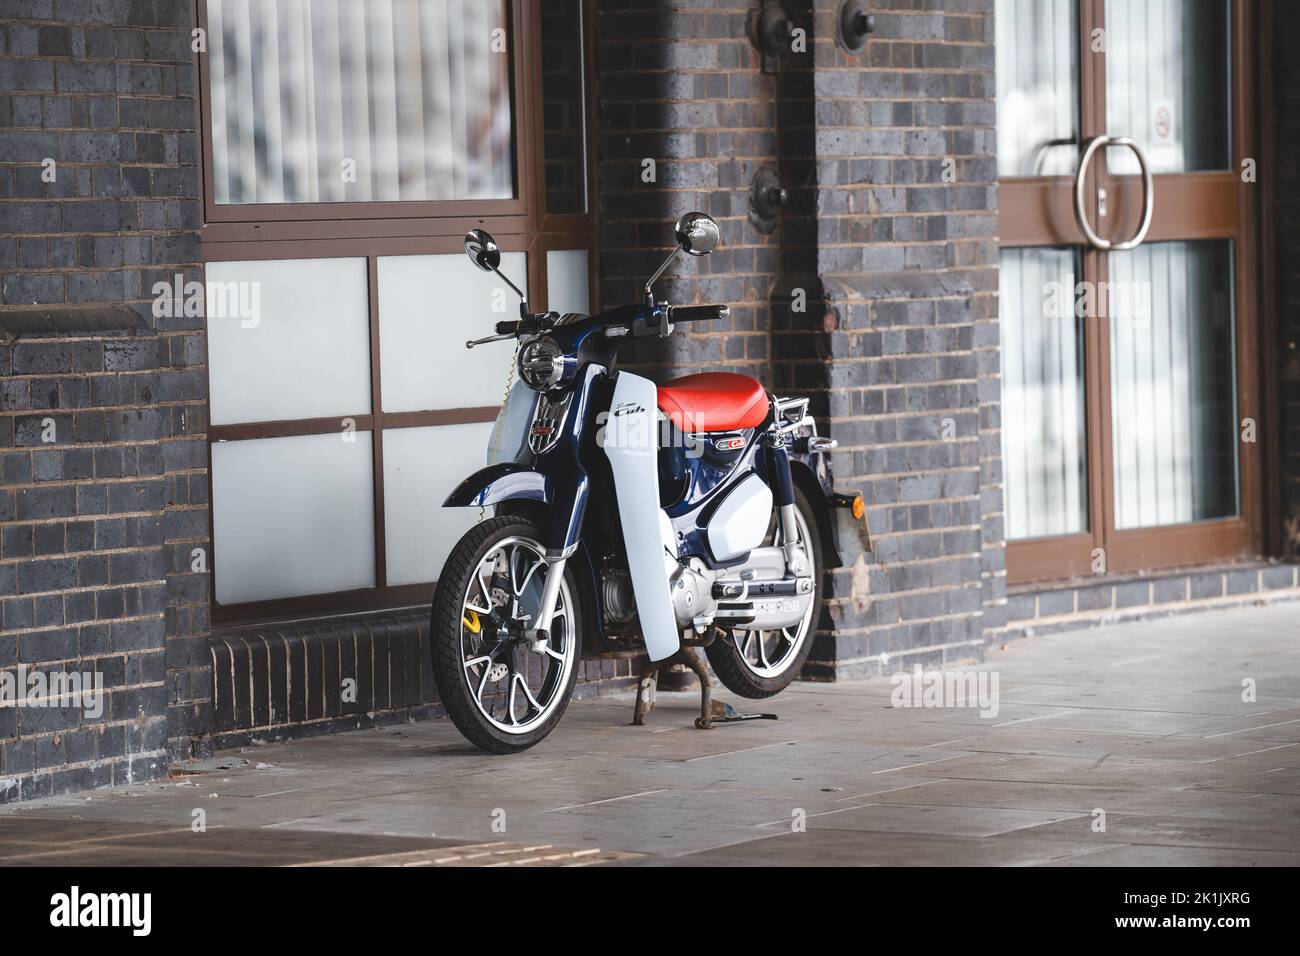 A moped against a brick wall outdoors in Ipswich, England Stock Photo